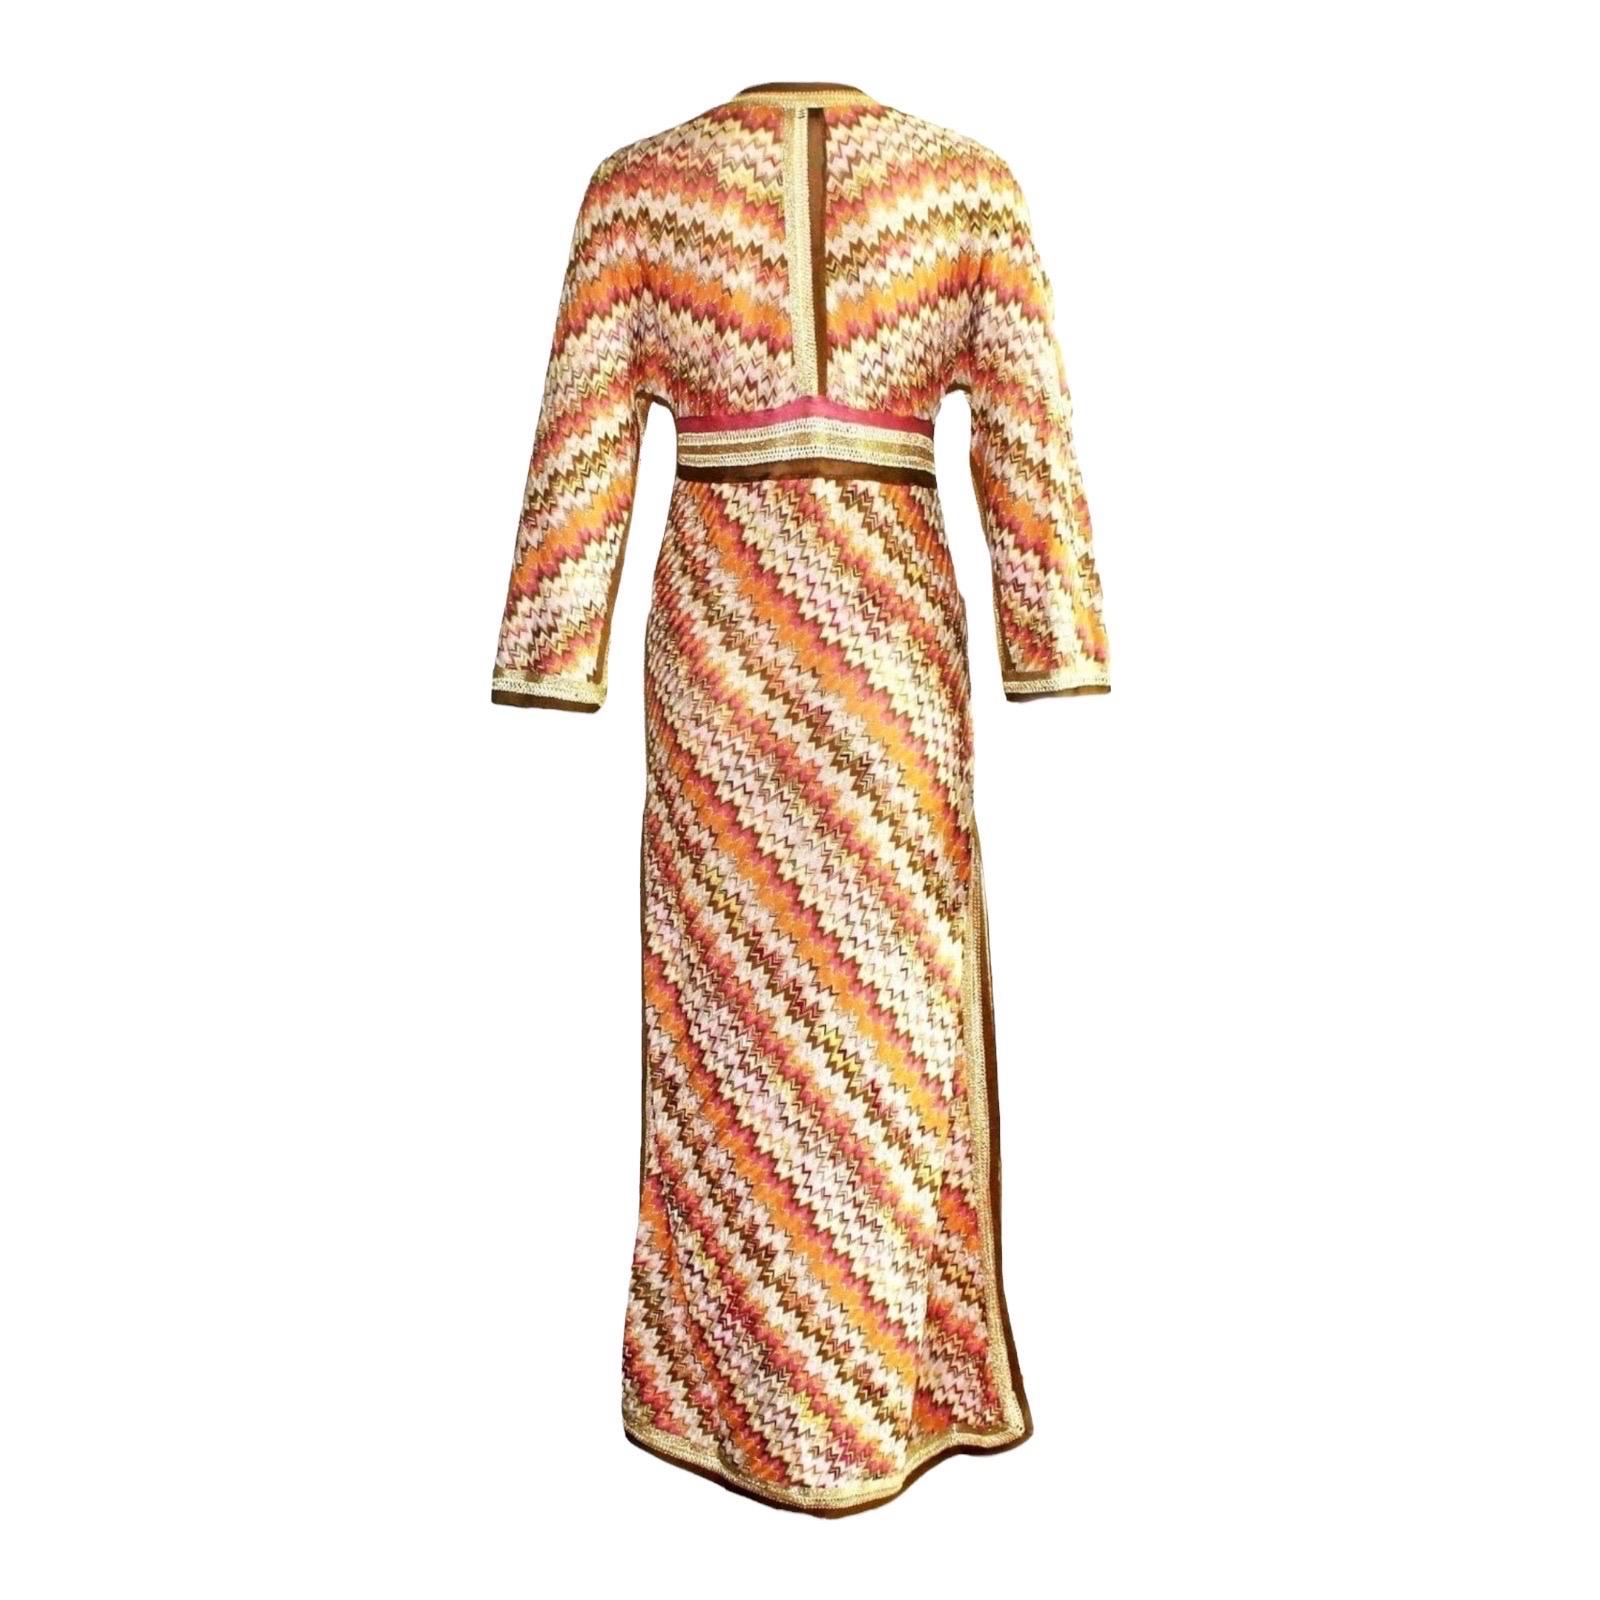 Beautiful multicolored golden lurex Missoni kaftan maxi dress
Classic Missoni signature knit
Simply slips on
Deep V-Neck
Crochet-knit detail trimming
Dry Clean only
Made in Italy
Size 40
Unworn